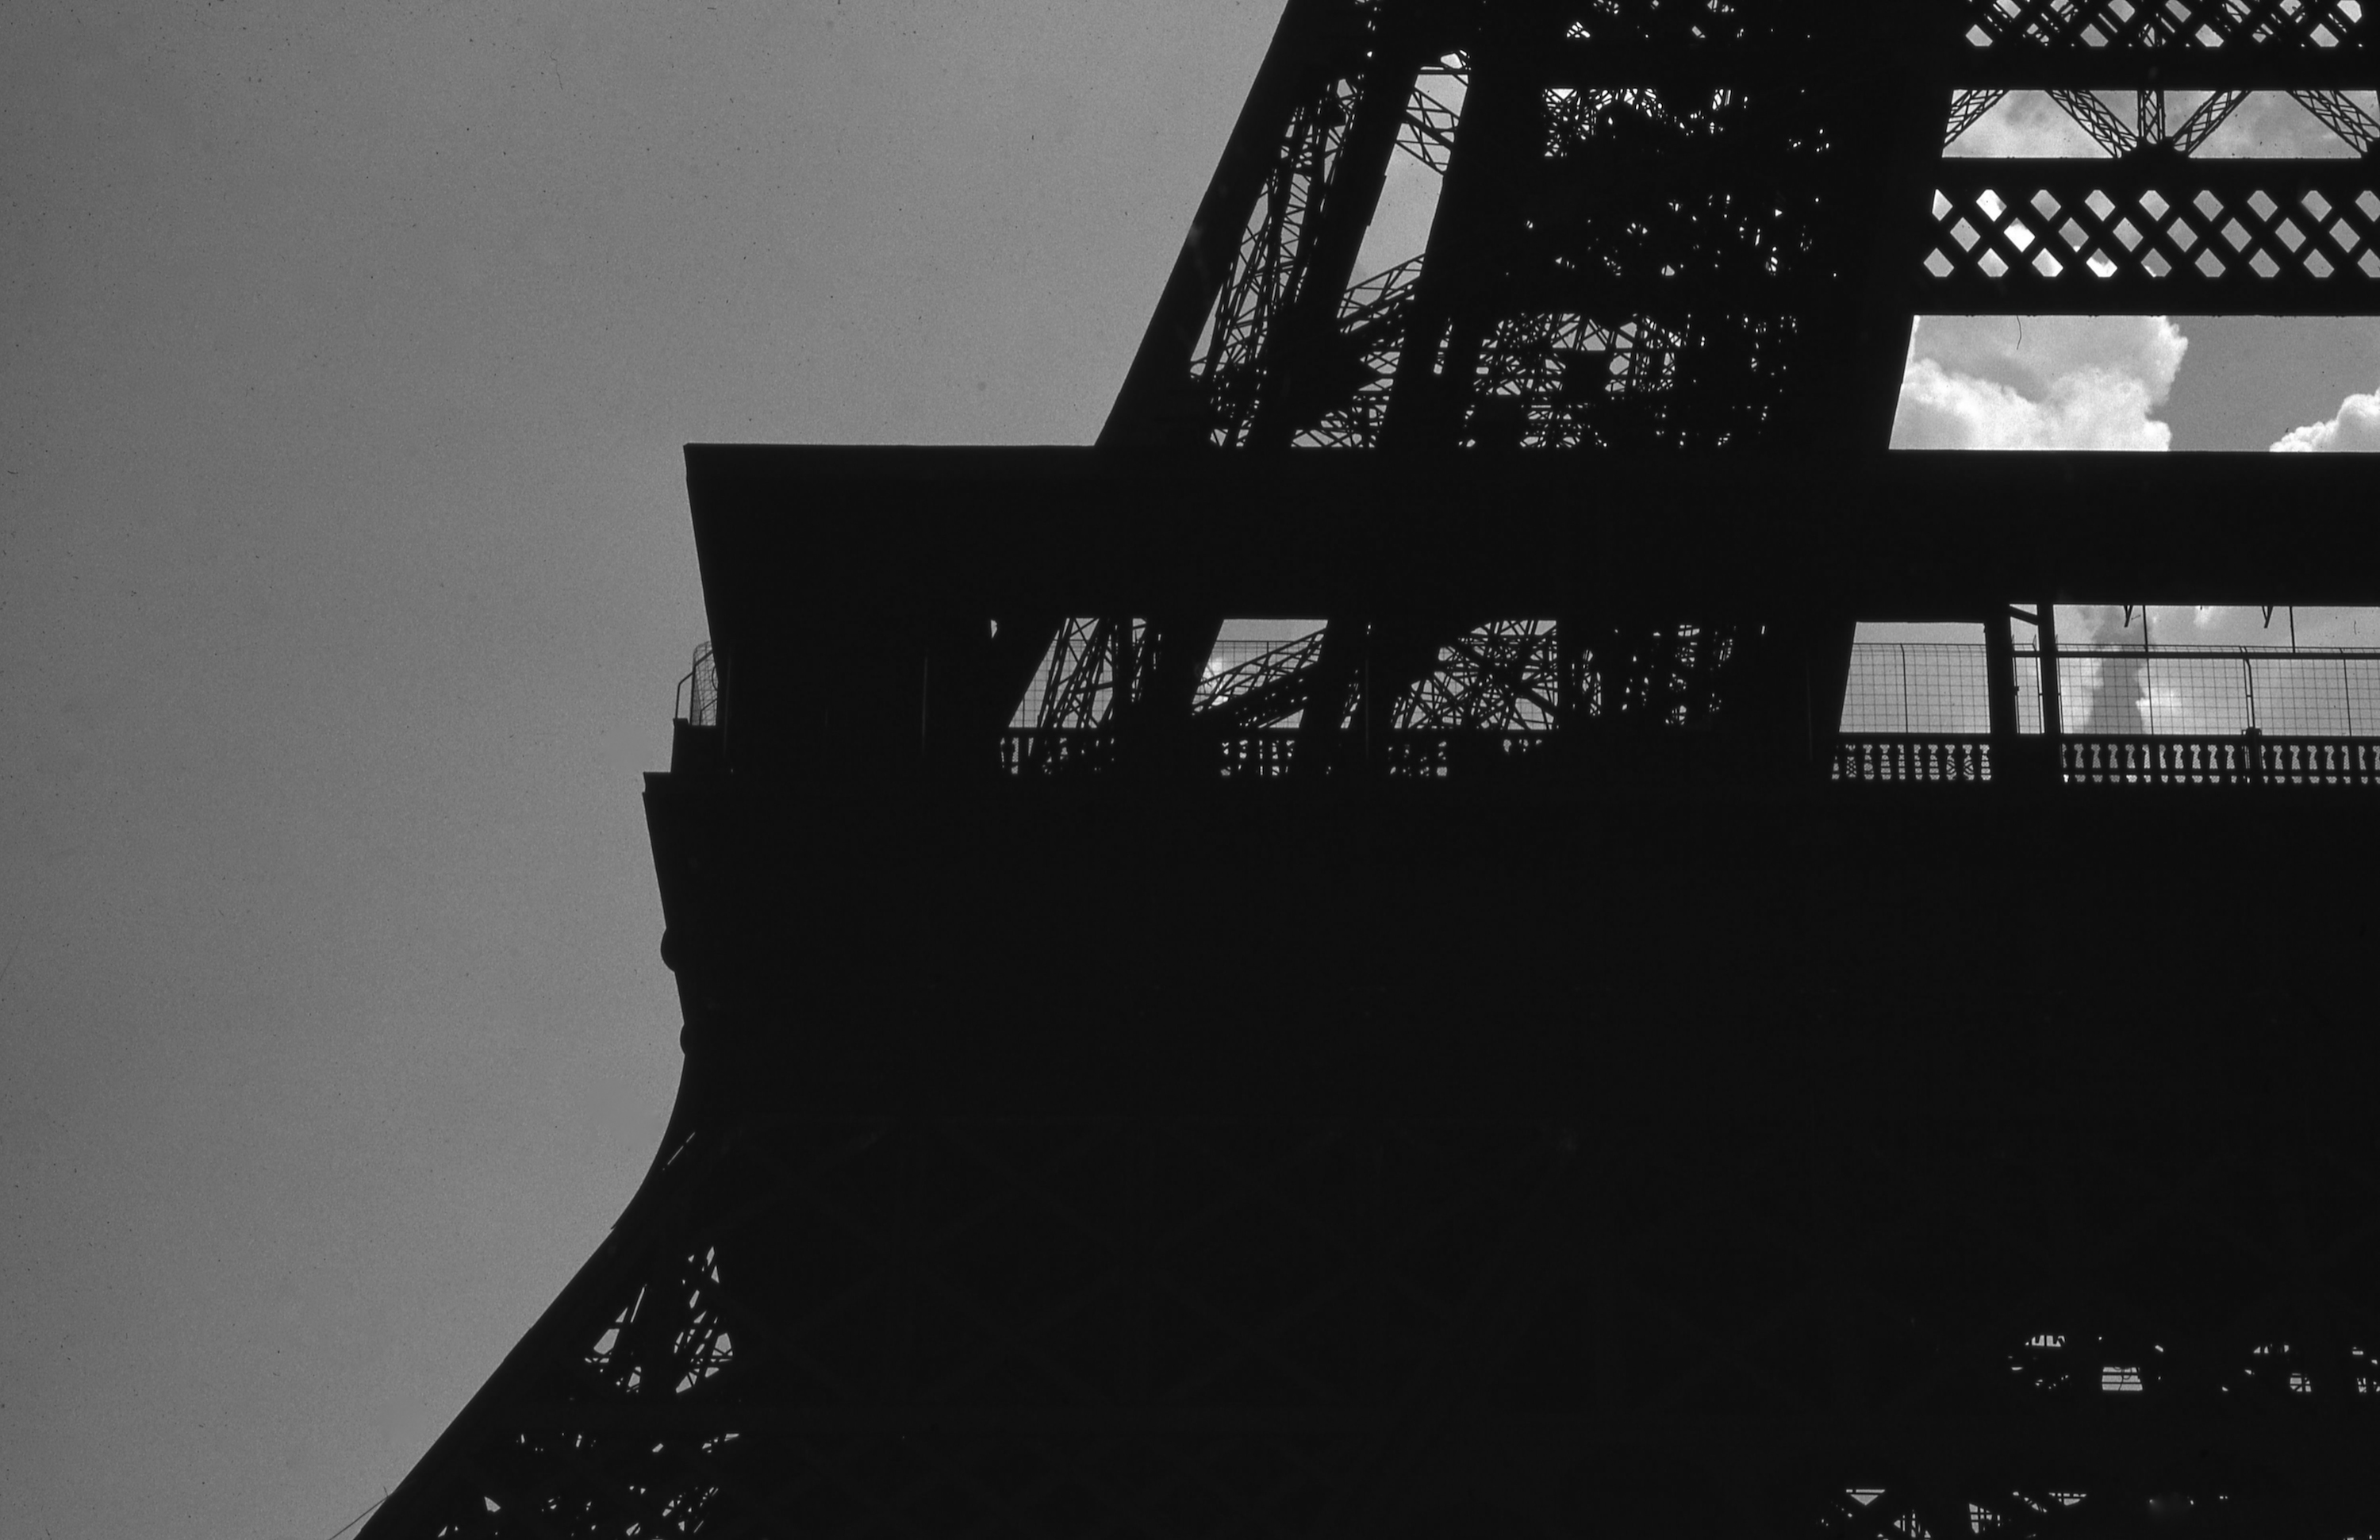 The Eiffel Tower in Paris in a photo from "Recovered Memory: New York and Paris 1960-1980" 